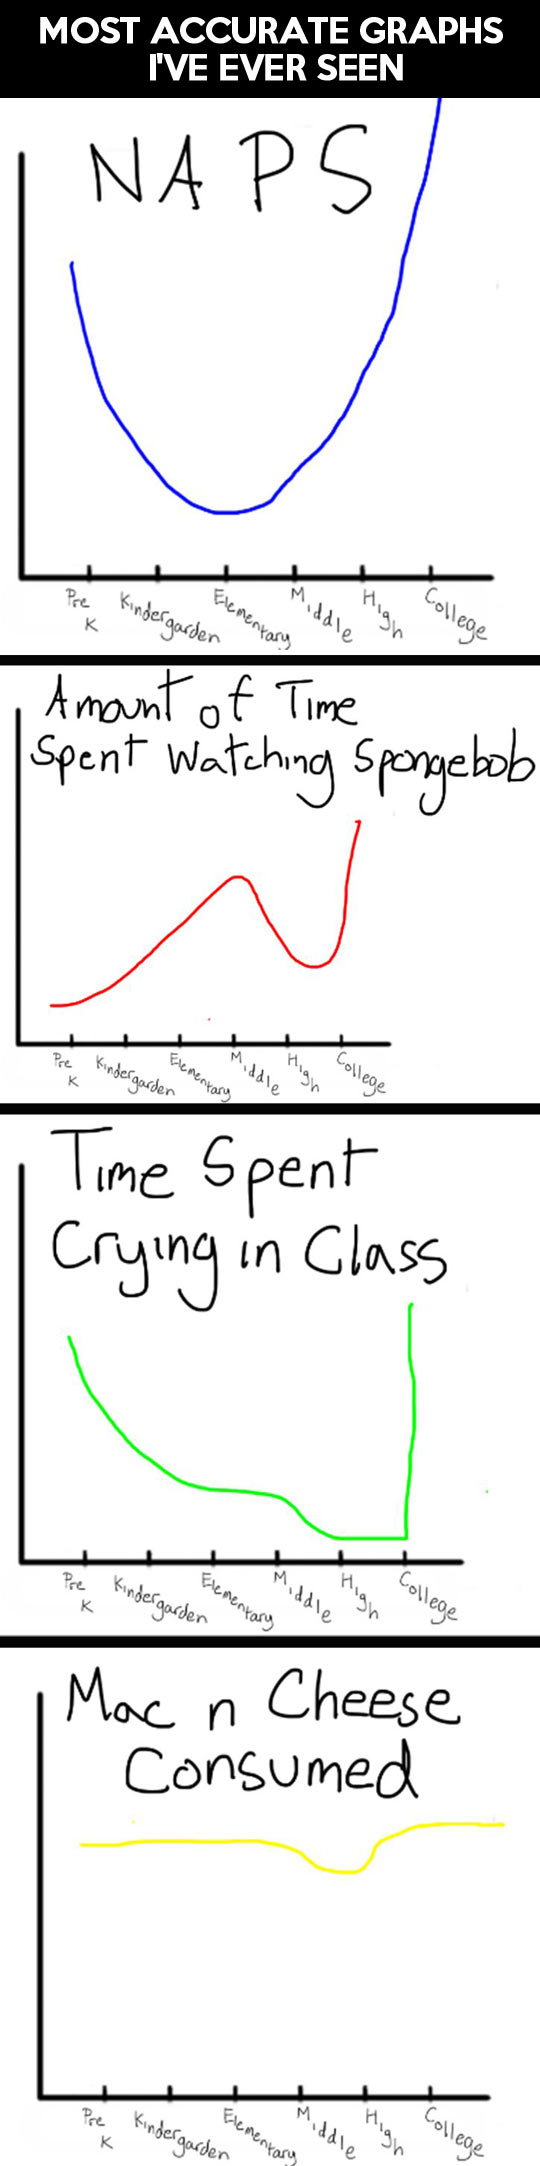 Most accurate graphs ever made...